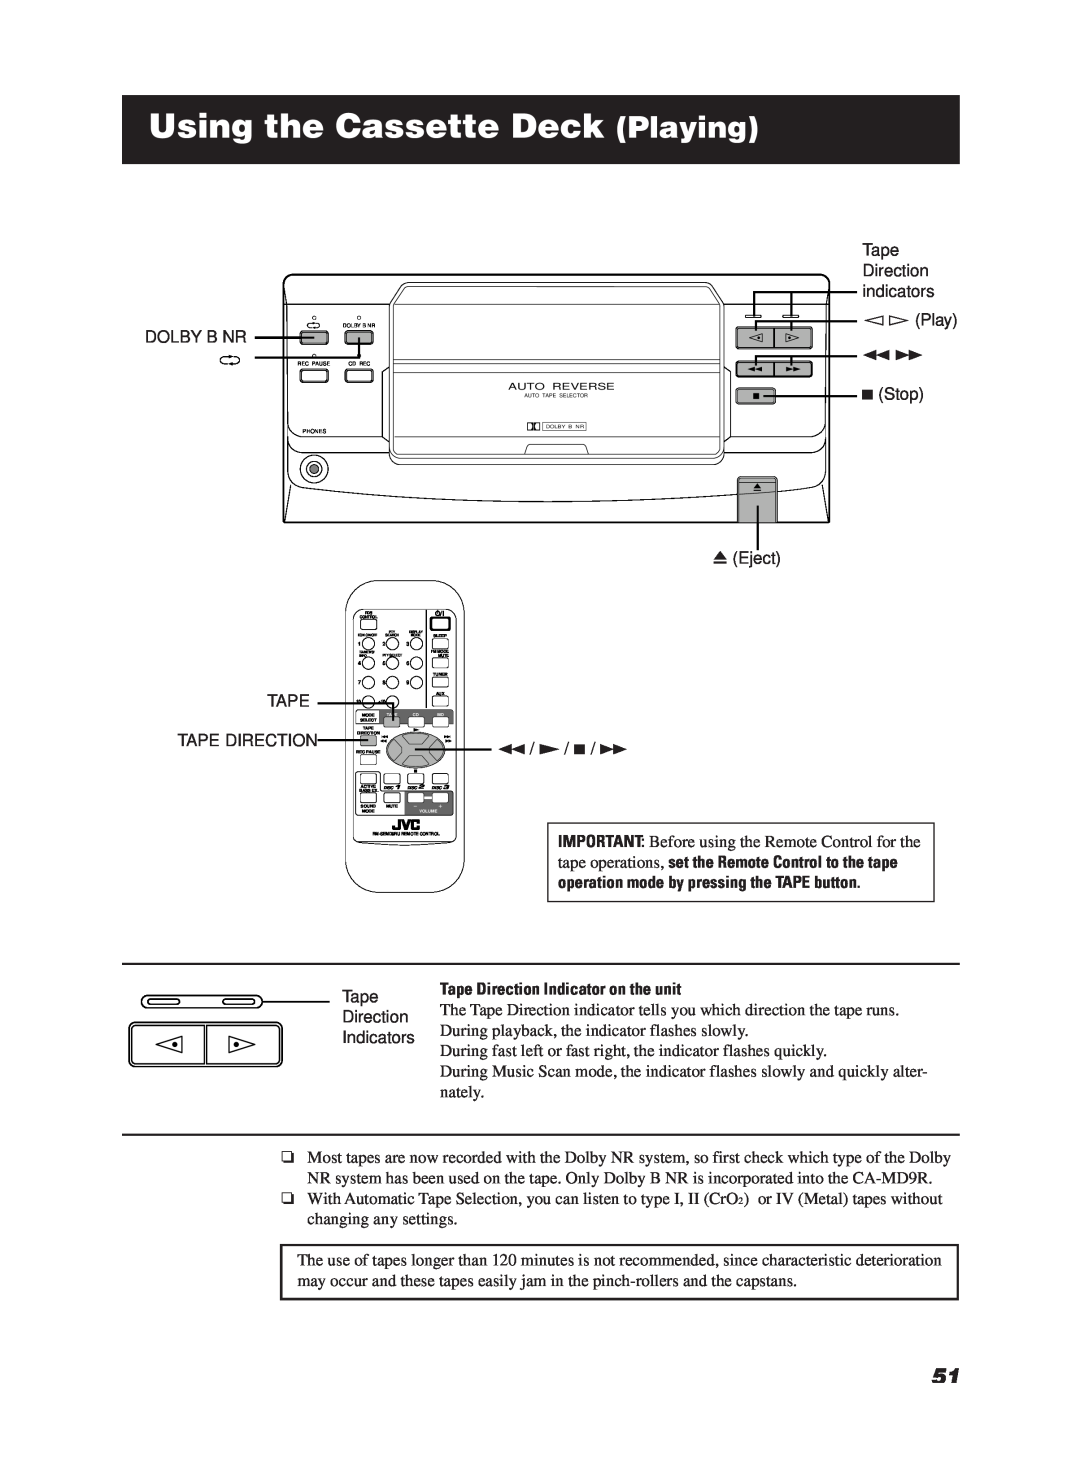 JVC LET0070-002A manual Using the Cassette Deck Playing, Tape Direction Indicator on the unit 